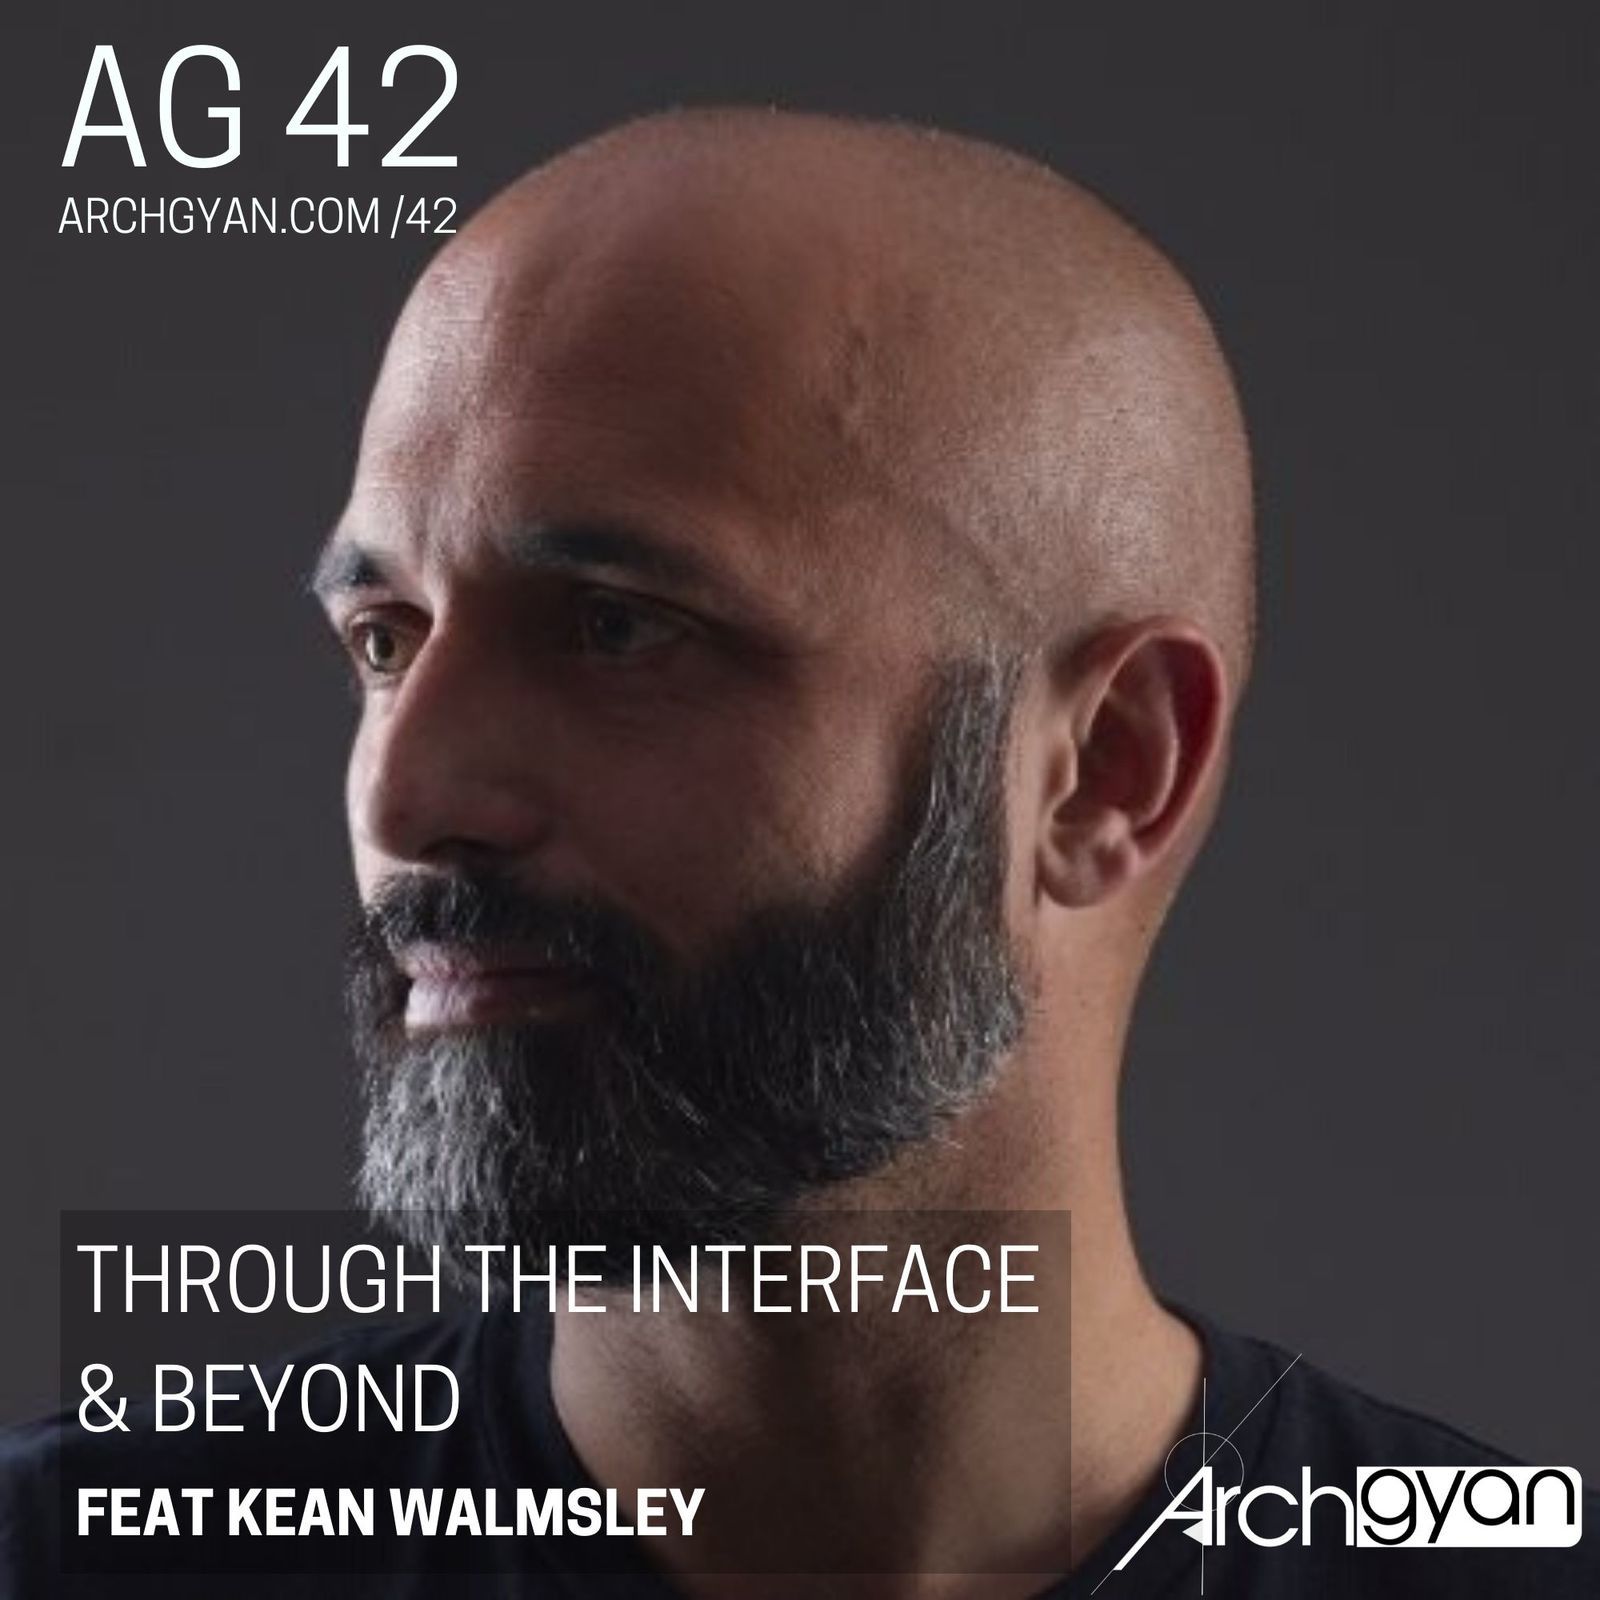 Through the Interface & Beyond with Kean Walmsley | AG 42